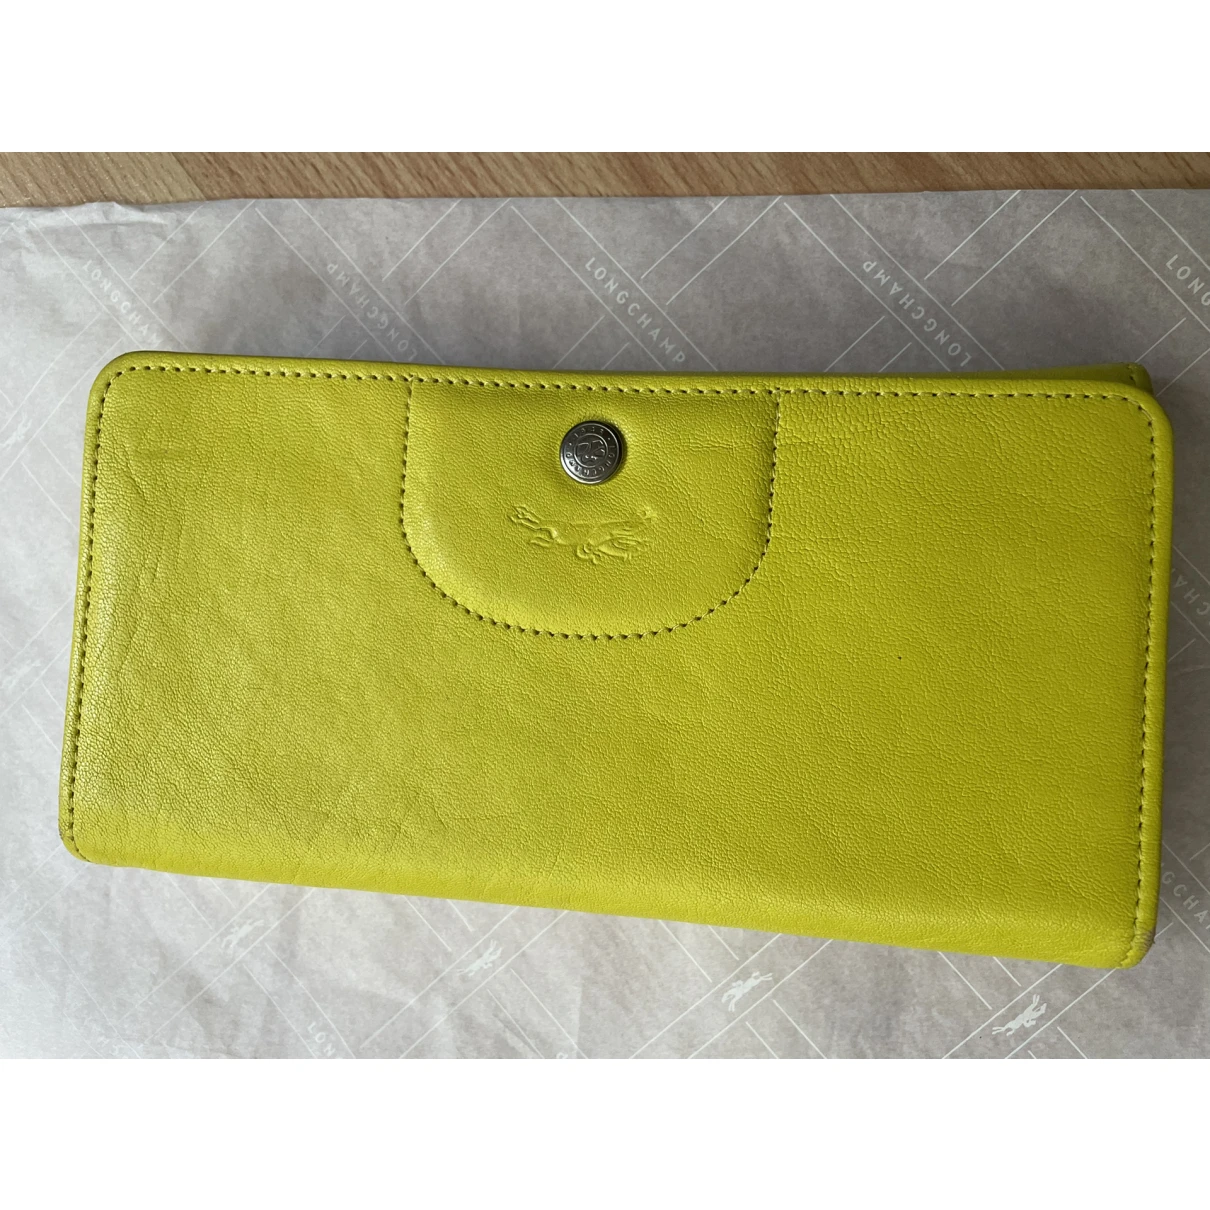 accessories Longchamp wallets for Female Leather. Used condition